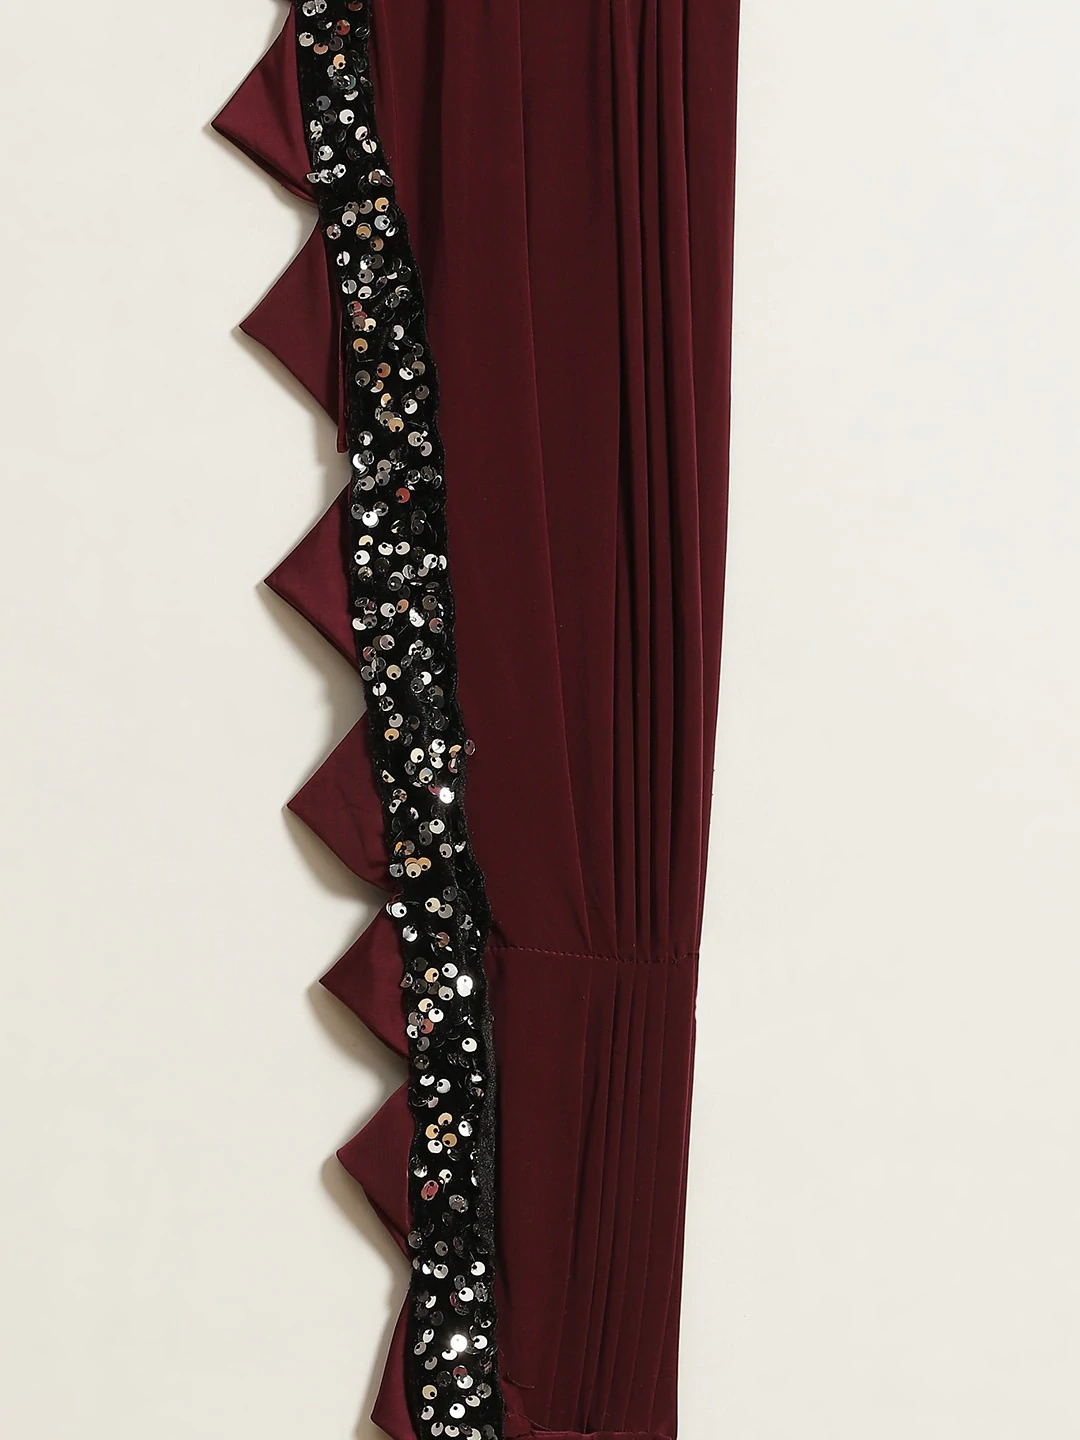 Ruffled Pre-Draped Ready to Wear Burgundy Sequin Embellished Saree with Floral Belt